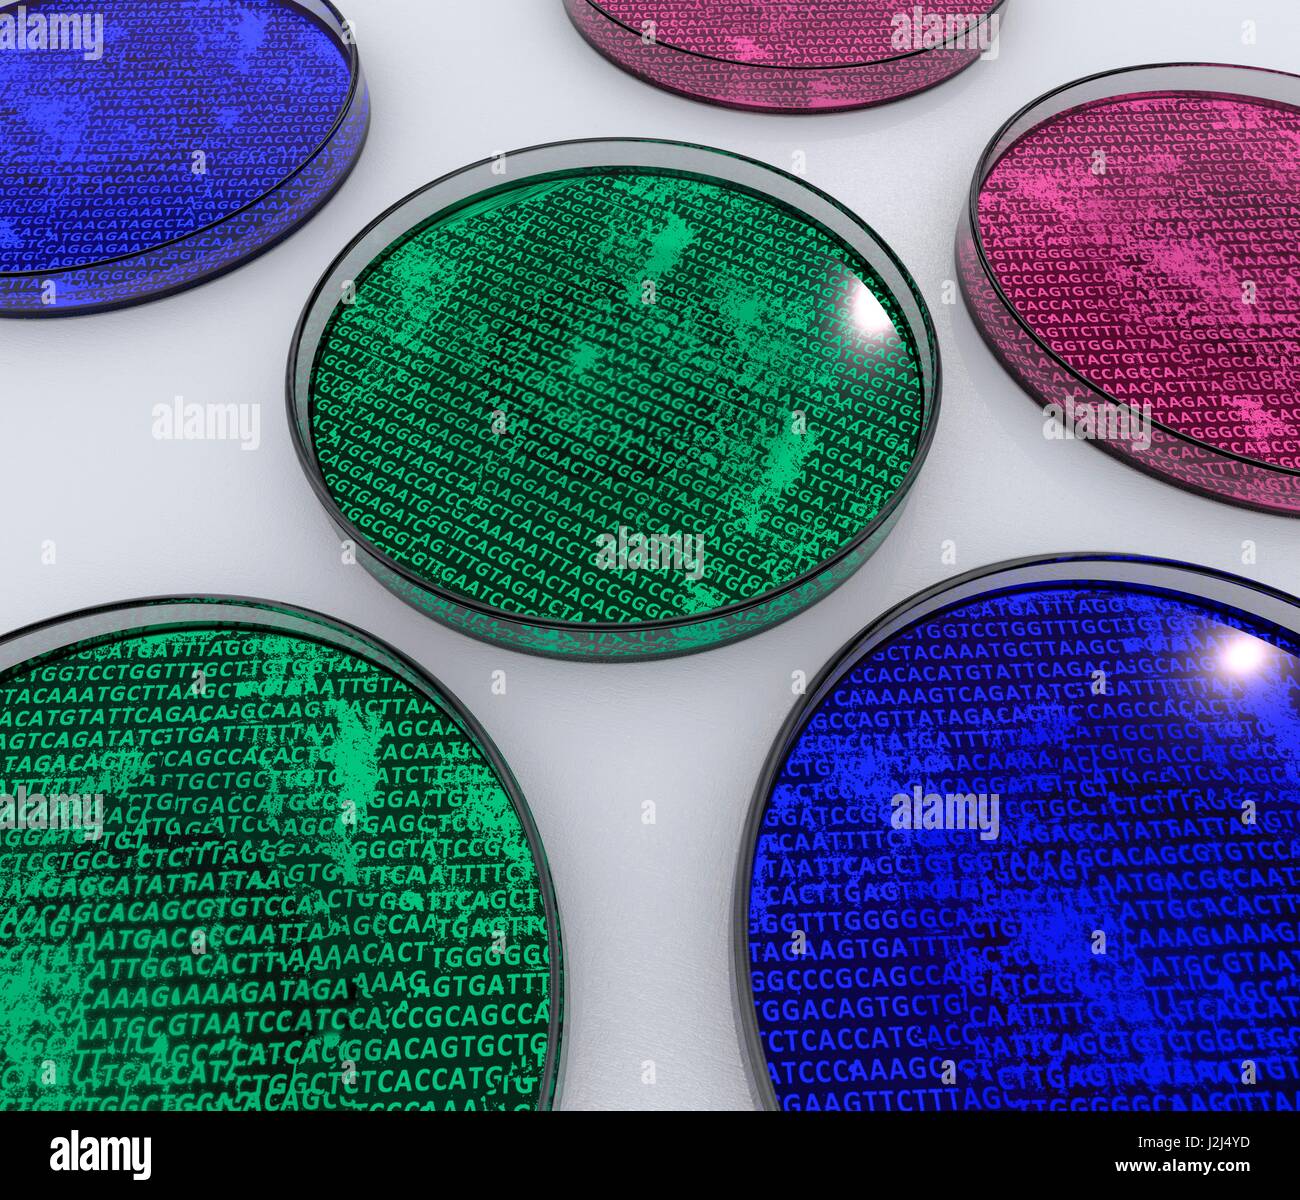 Conceptual image of cultures in petri dishes containing genetic material. Computer artwork. Stock Photo